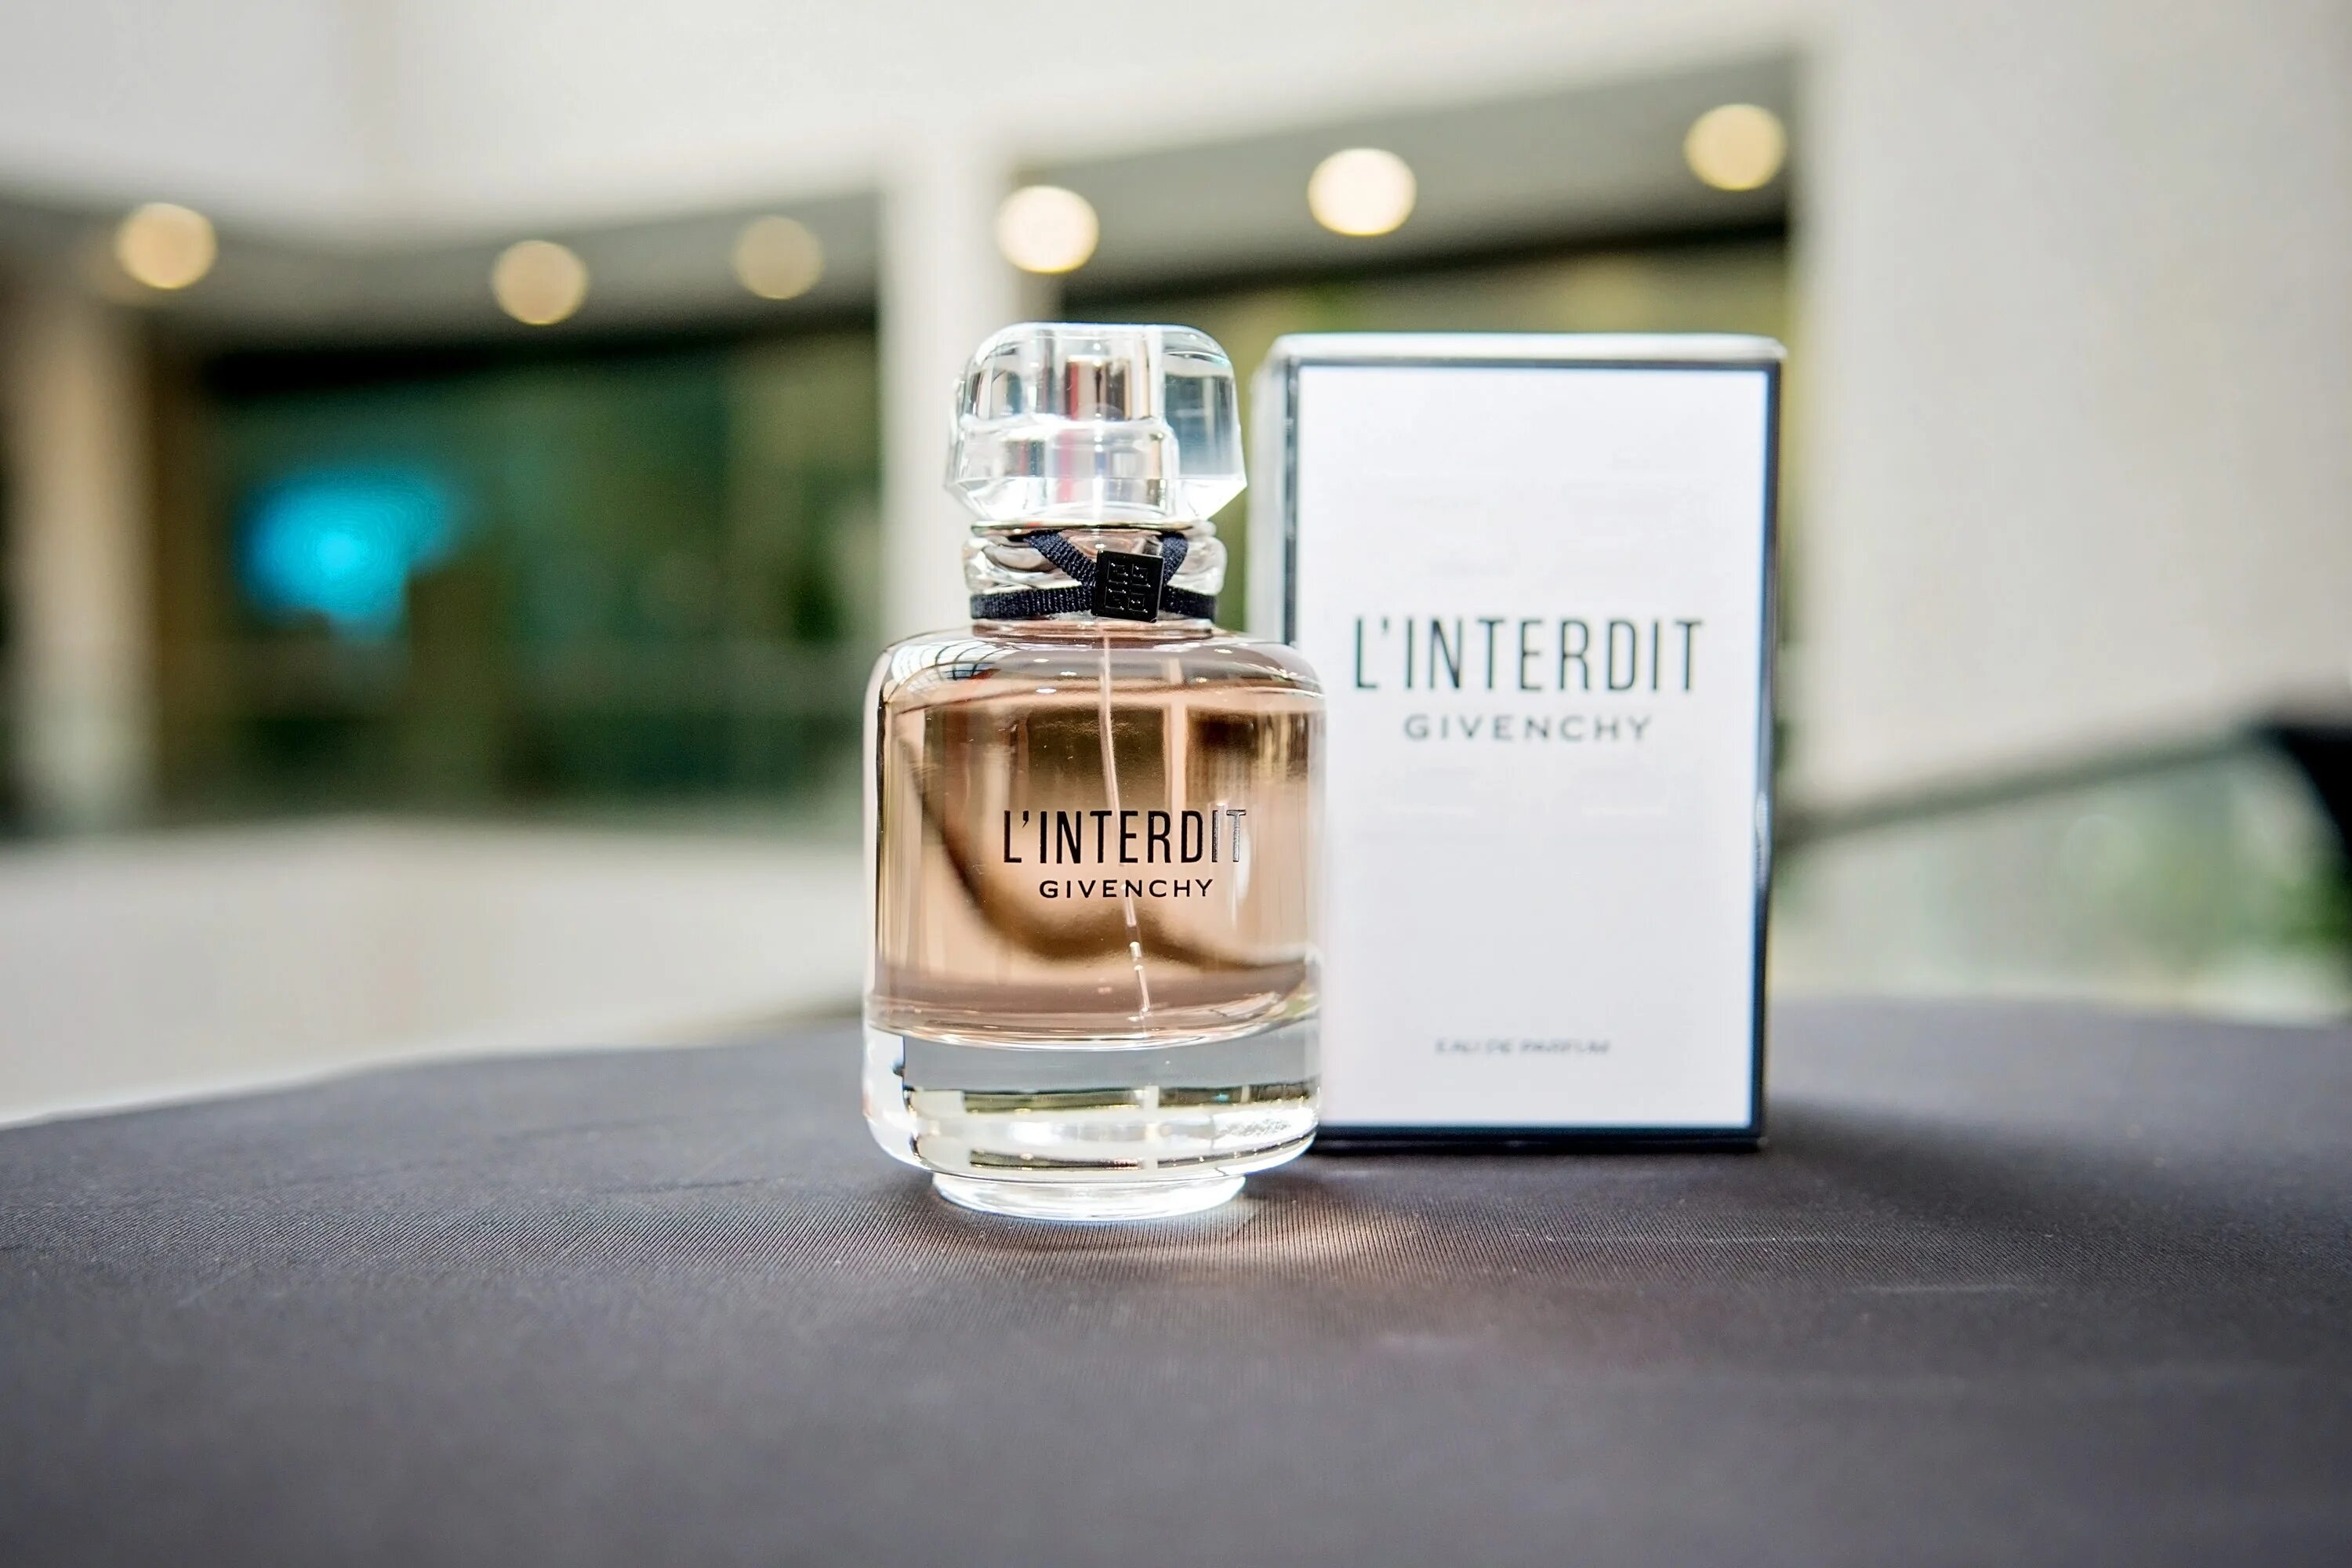 Givenchy l'interdit. Духи Givenchy l'interdit. Givenchy l'interdit 100 ml. Парфюмерная вода Givenchy l'interdit Eau de Parfum.